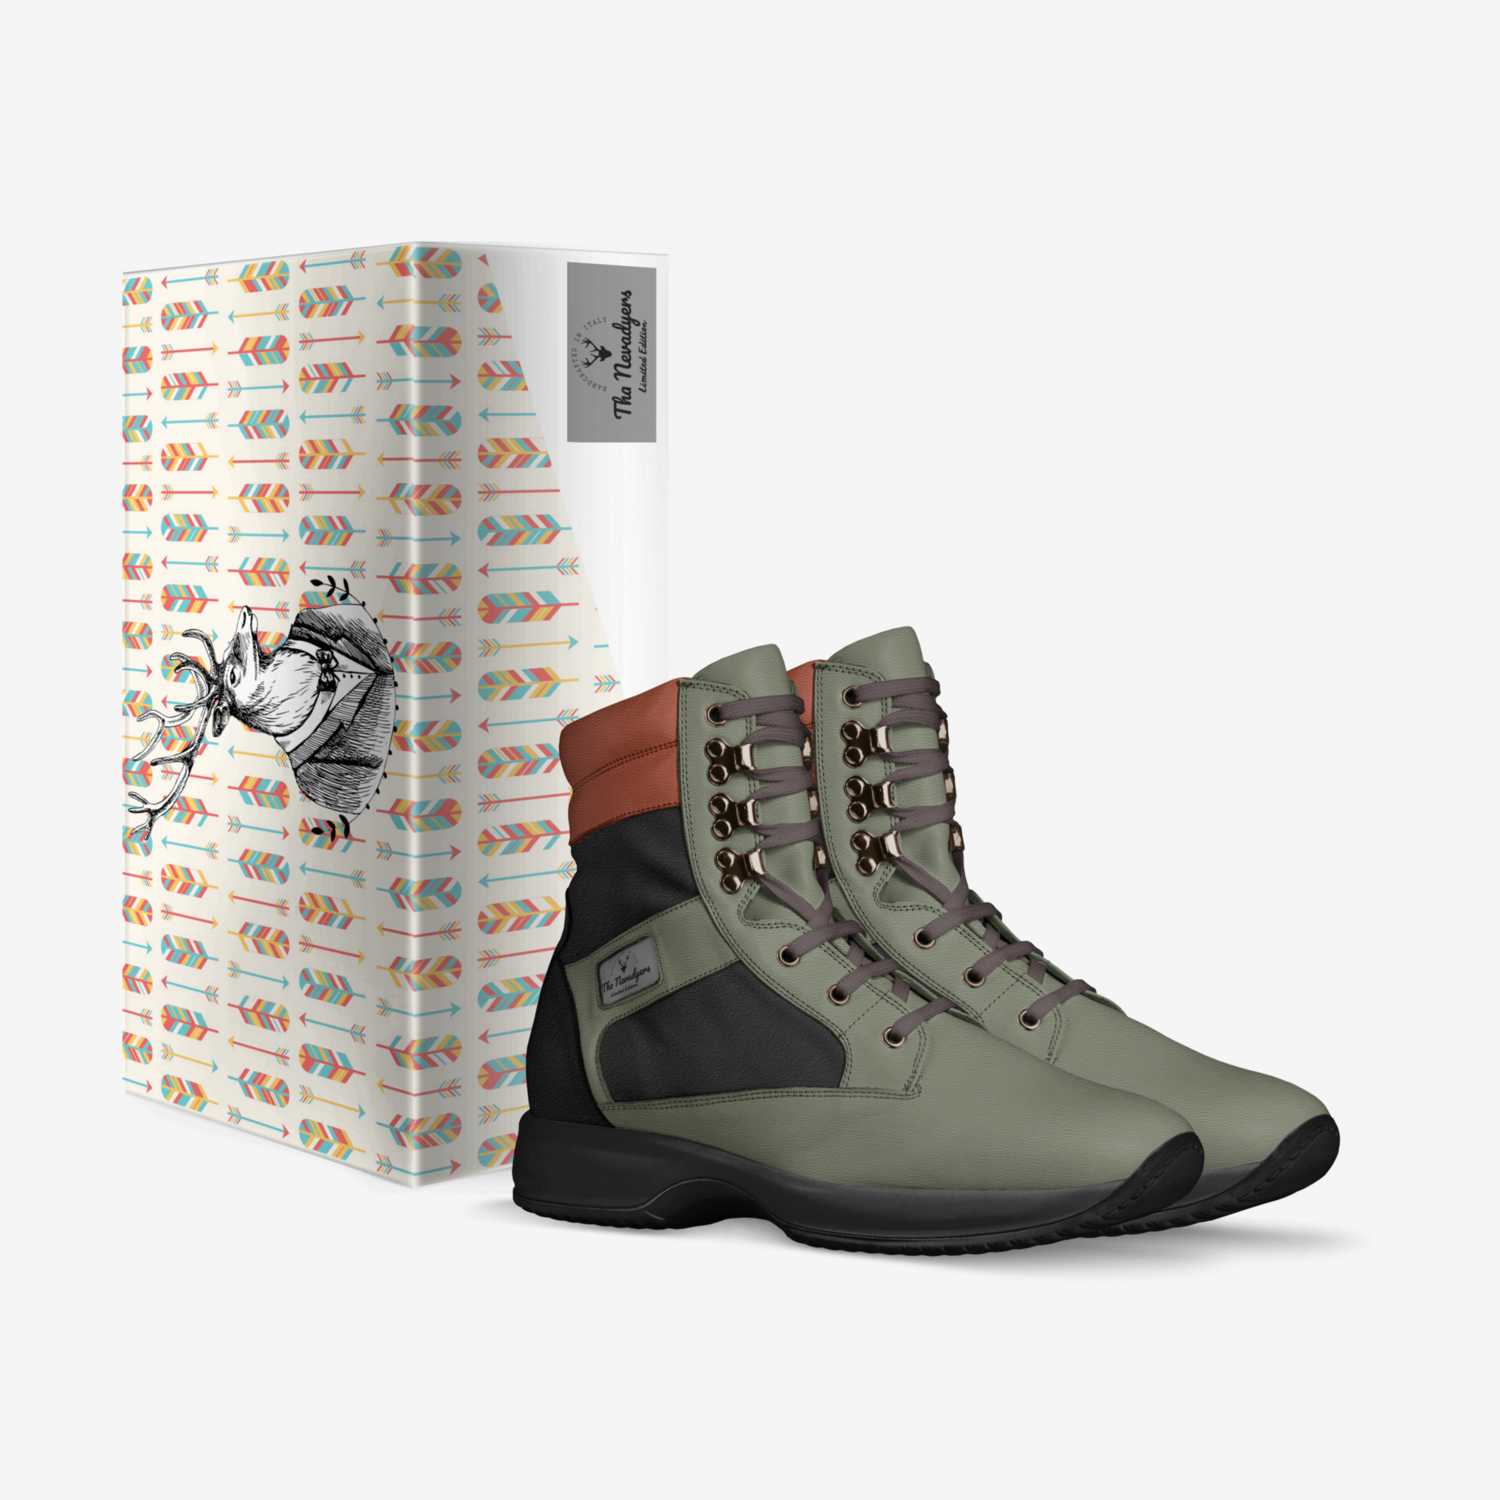 Smokers Boots custom made in Italy shoes by Galatikz Dixon | Box view